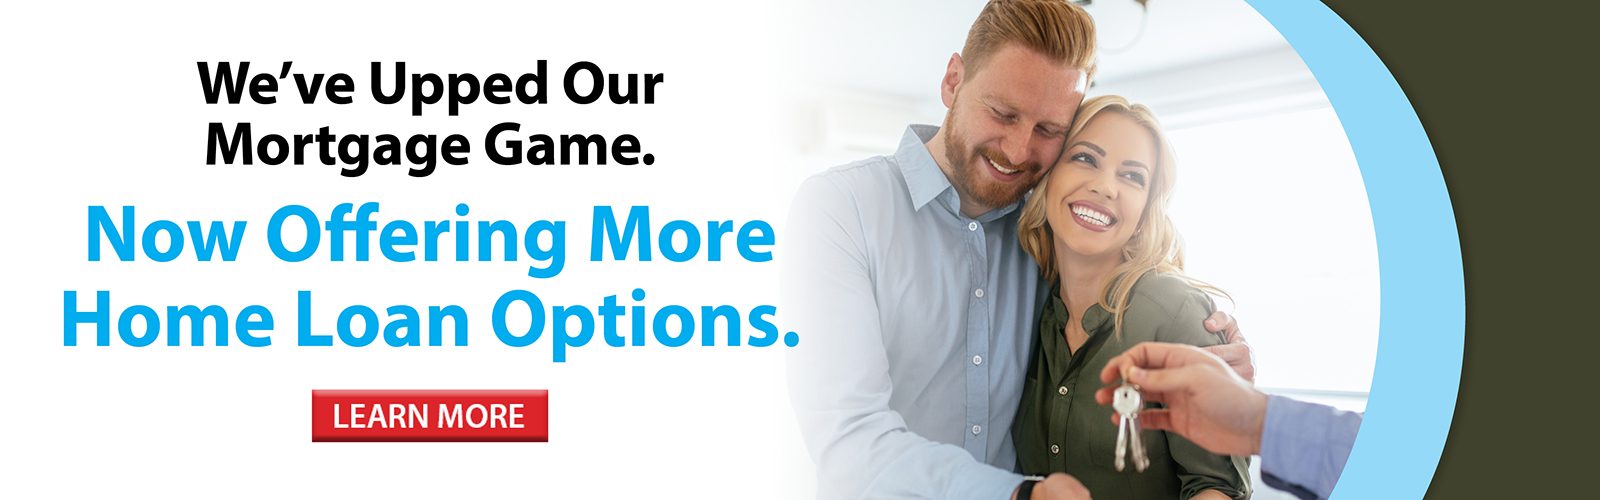 We've upped our mortgage game. Now offering more home loan options. Click here for more information!